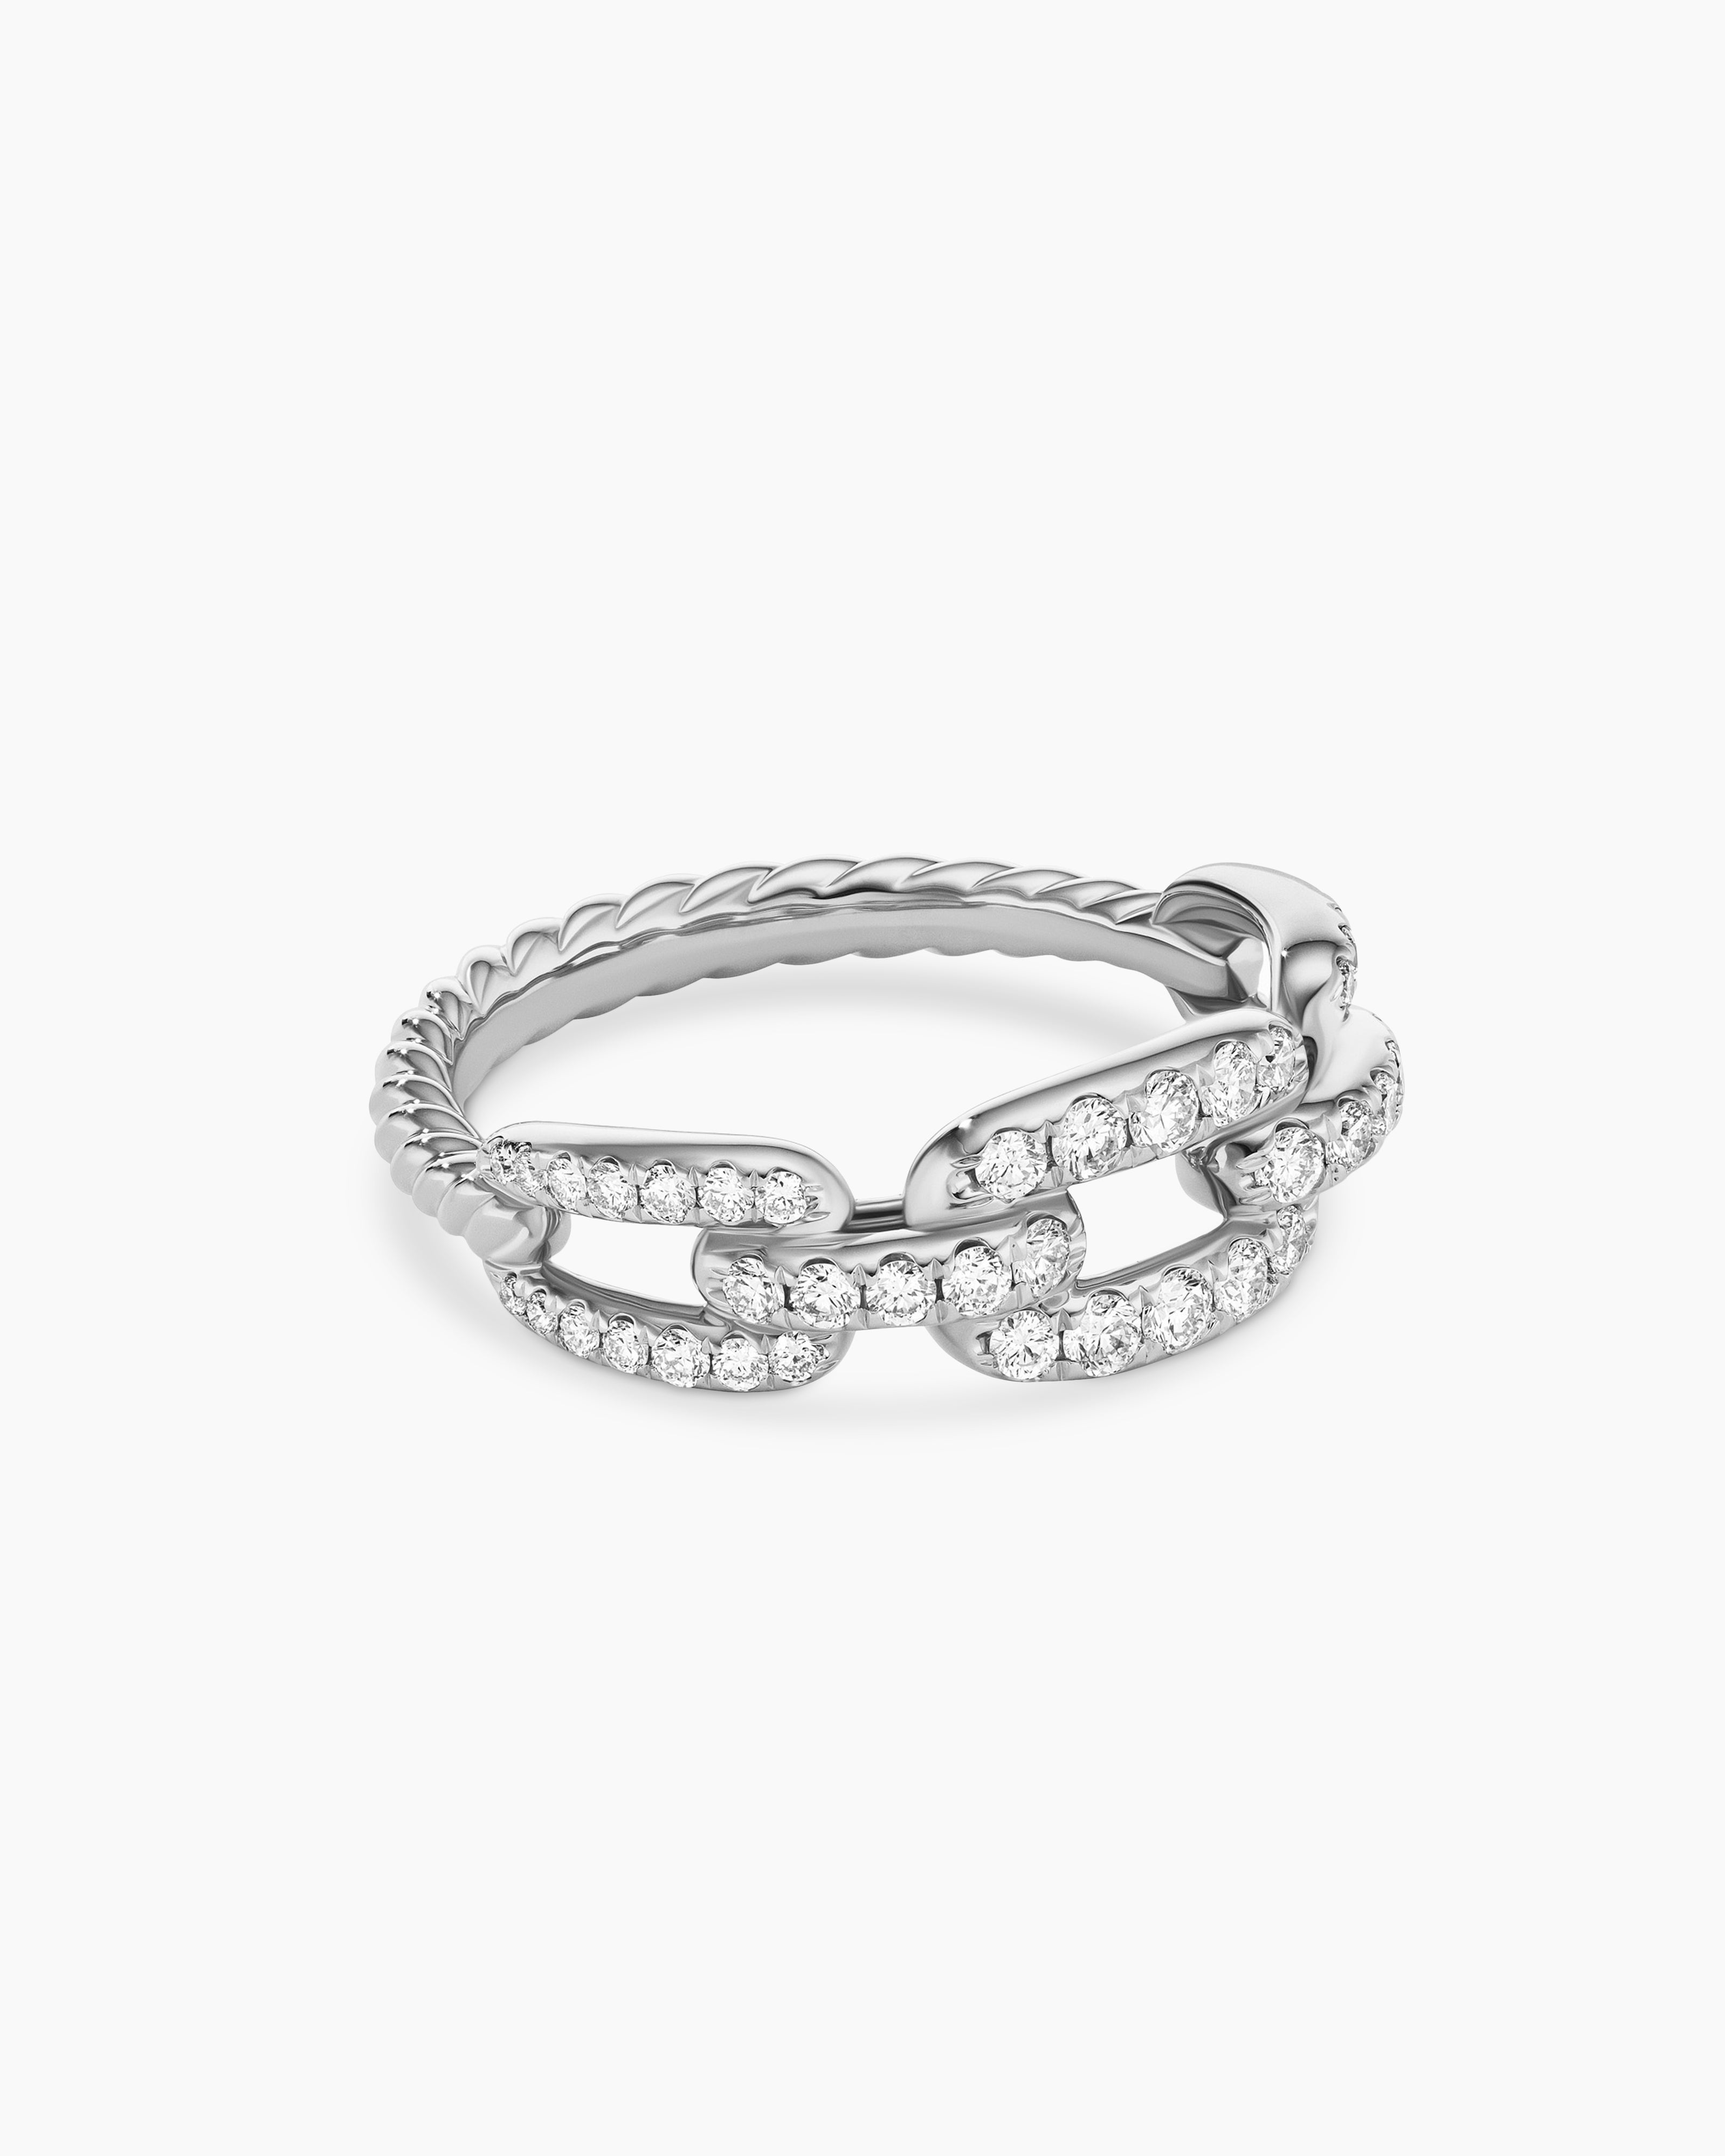 Stax Chain Link Ring in 18K Yellow Gold with Diamonds, 7mm | David